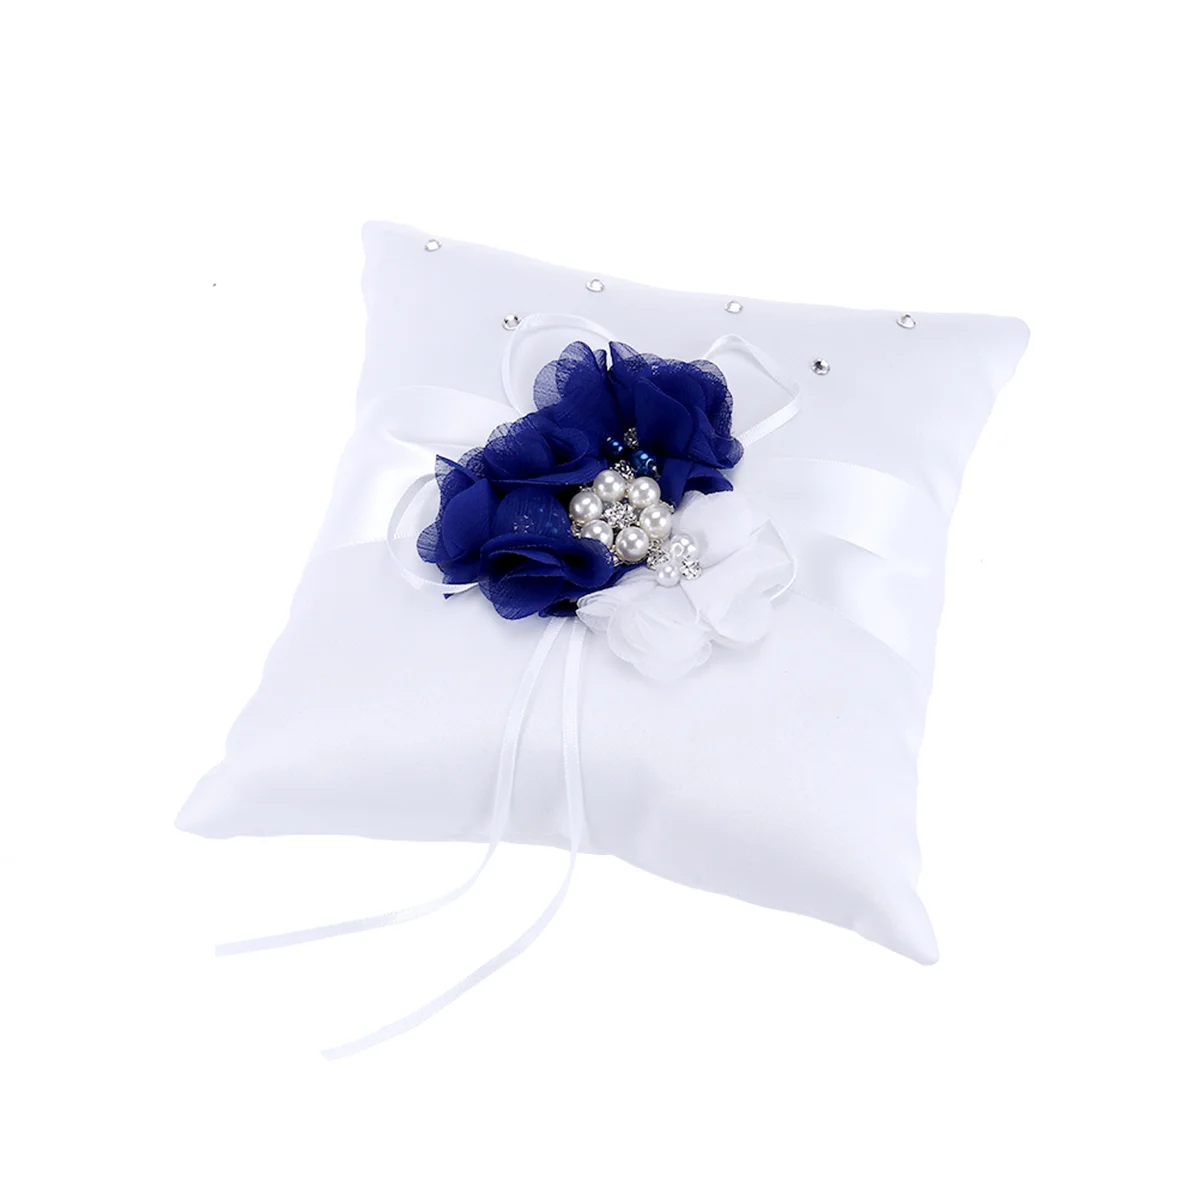 

Ring Pillow Wedding Bearer Pillows Box Ceremony Cushion Pearl Flower Holder Ribbon Bow Gifts Barrier Sign Gift Decorations Bride